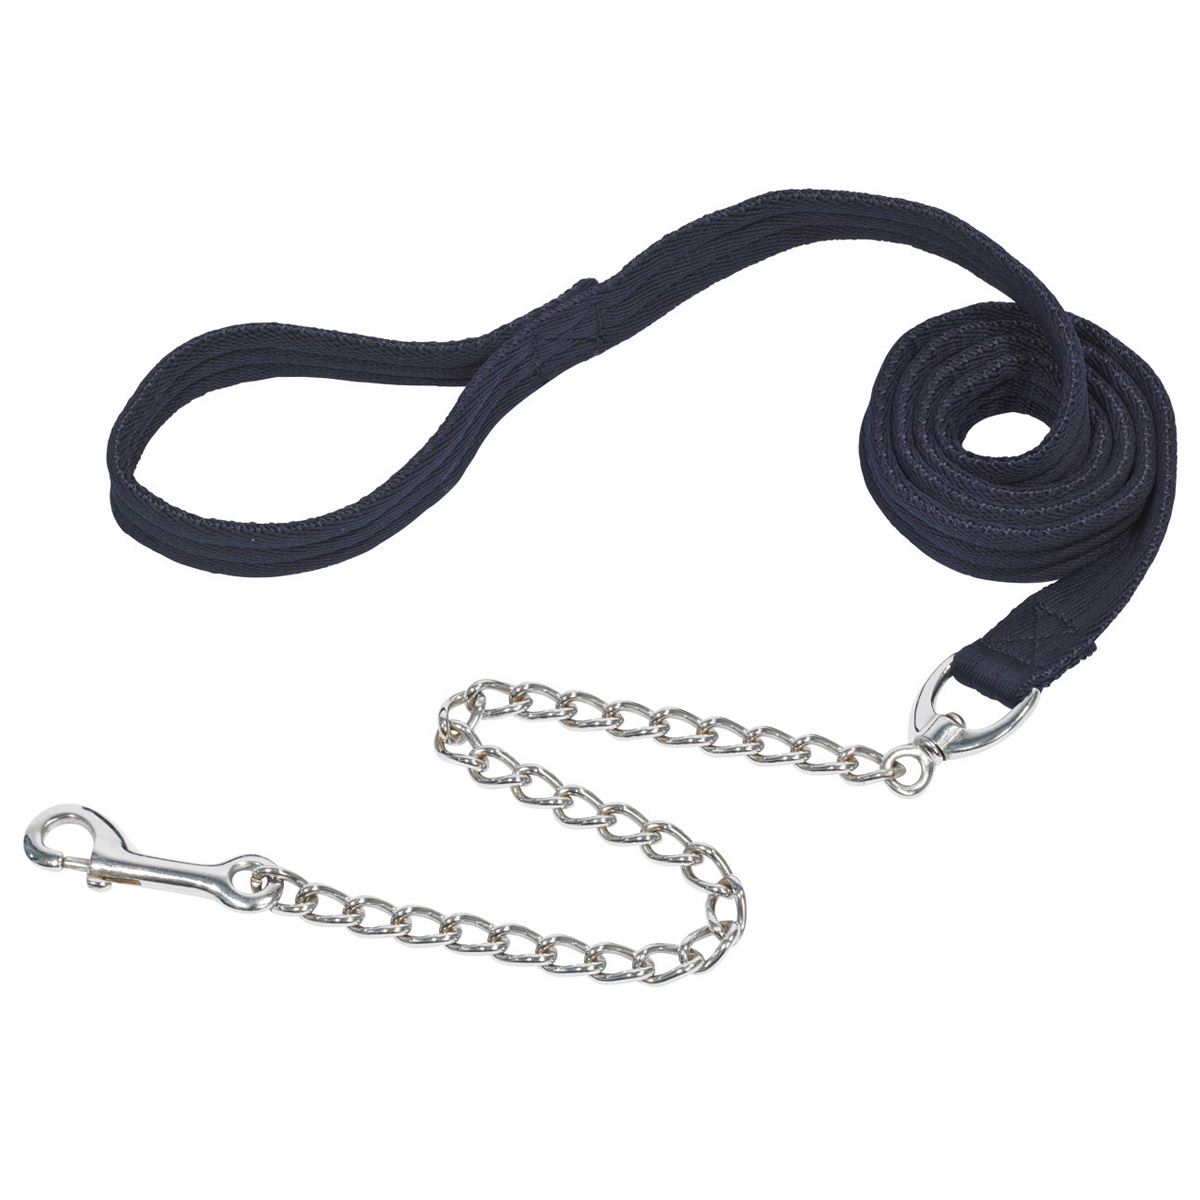 BUSSE Leading Rein SOFT, with Chain